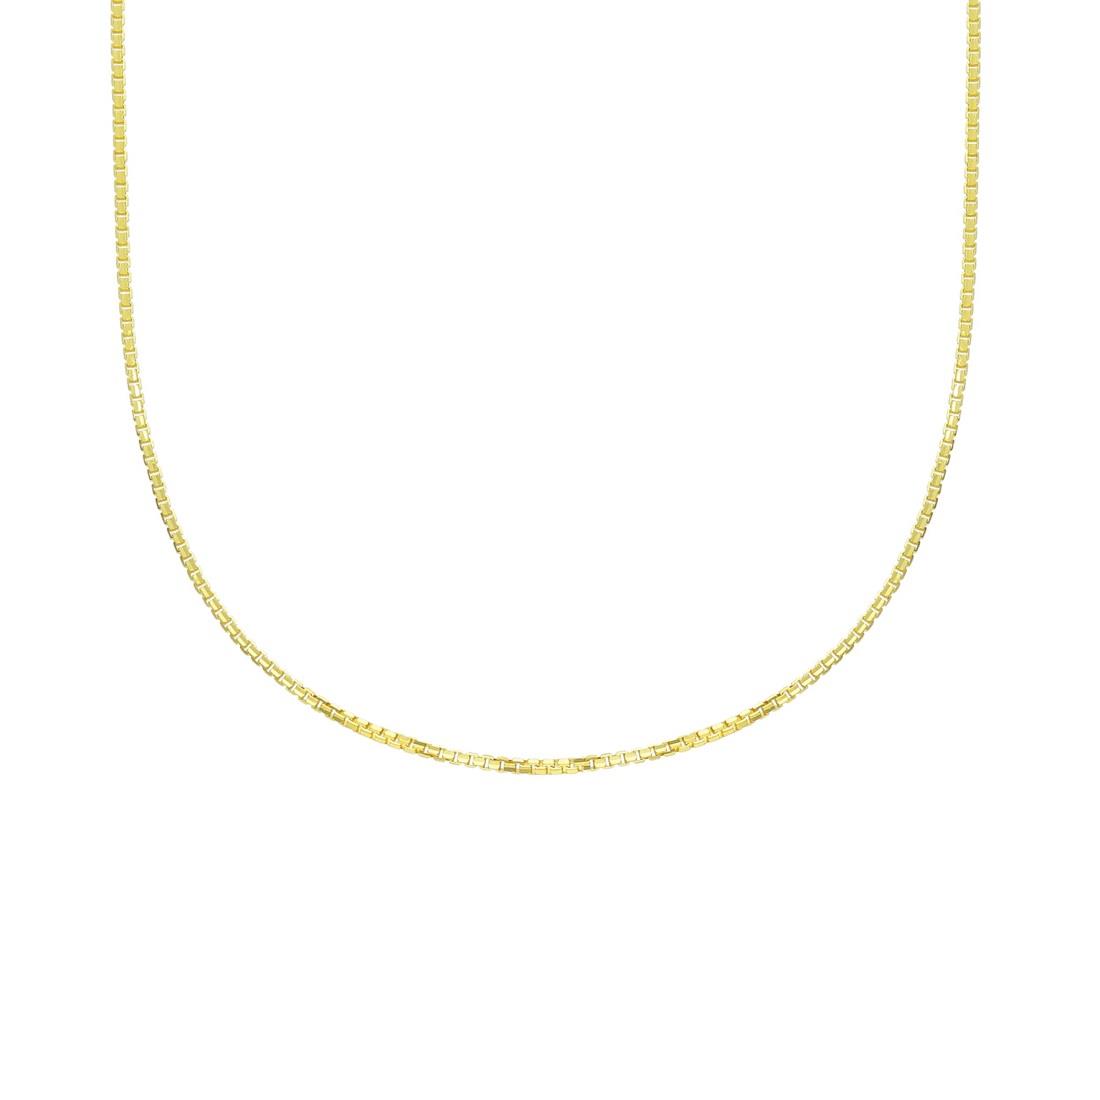 Octagonal link gold necklace - ORO&CO